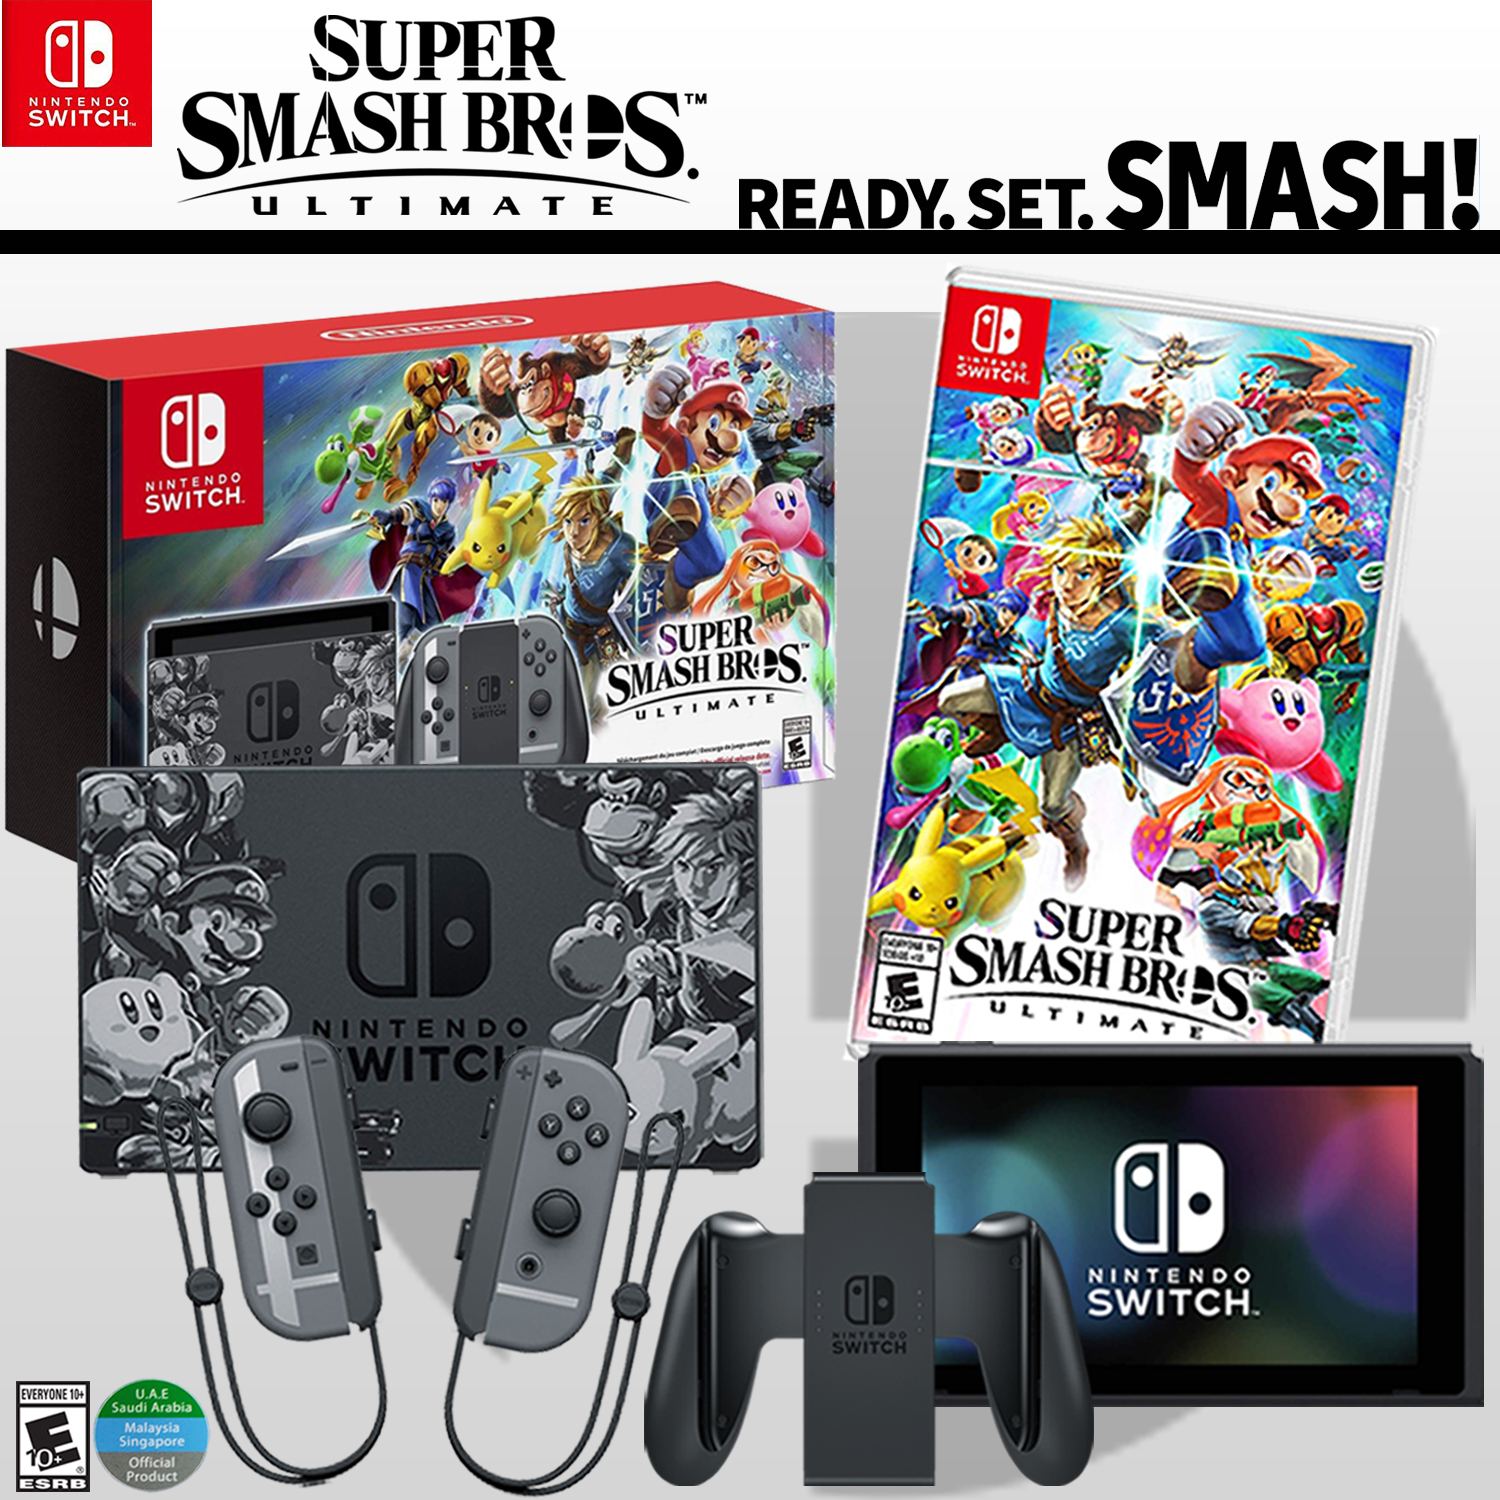 Bros. Nintendo Smash Super Switch [Limited Ultimate Edition] Special Set